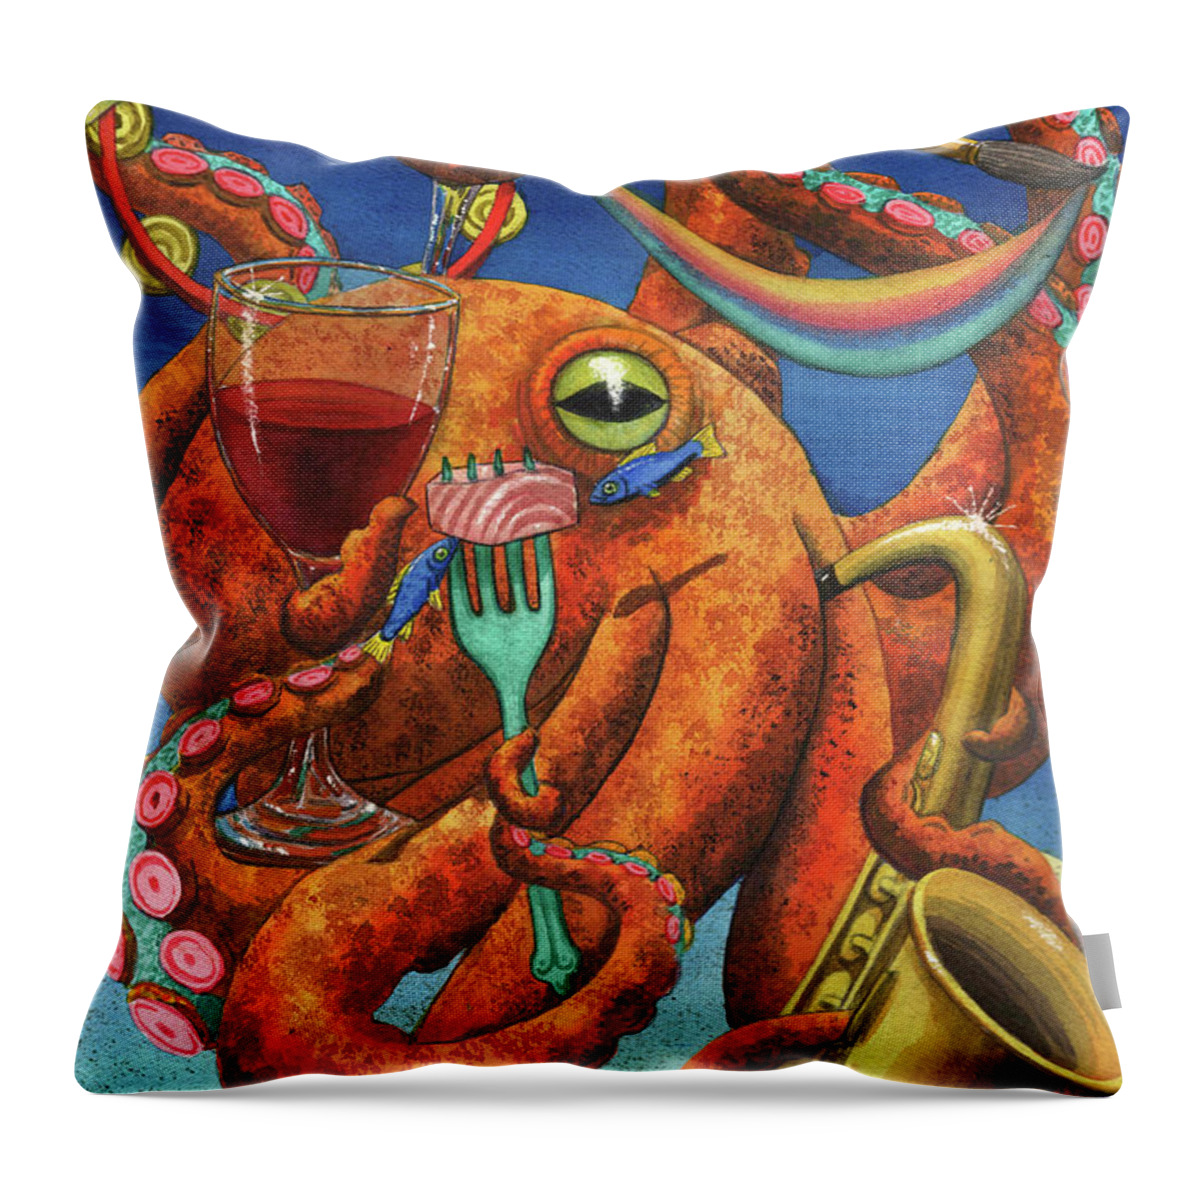 Octopus Throw Pillow featuring the painting Art Partypus by Catherine G McElroy